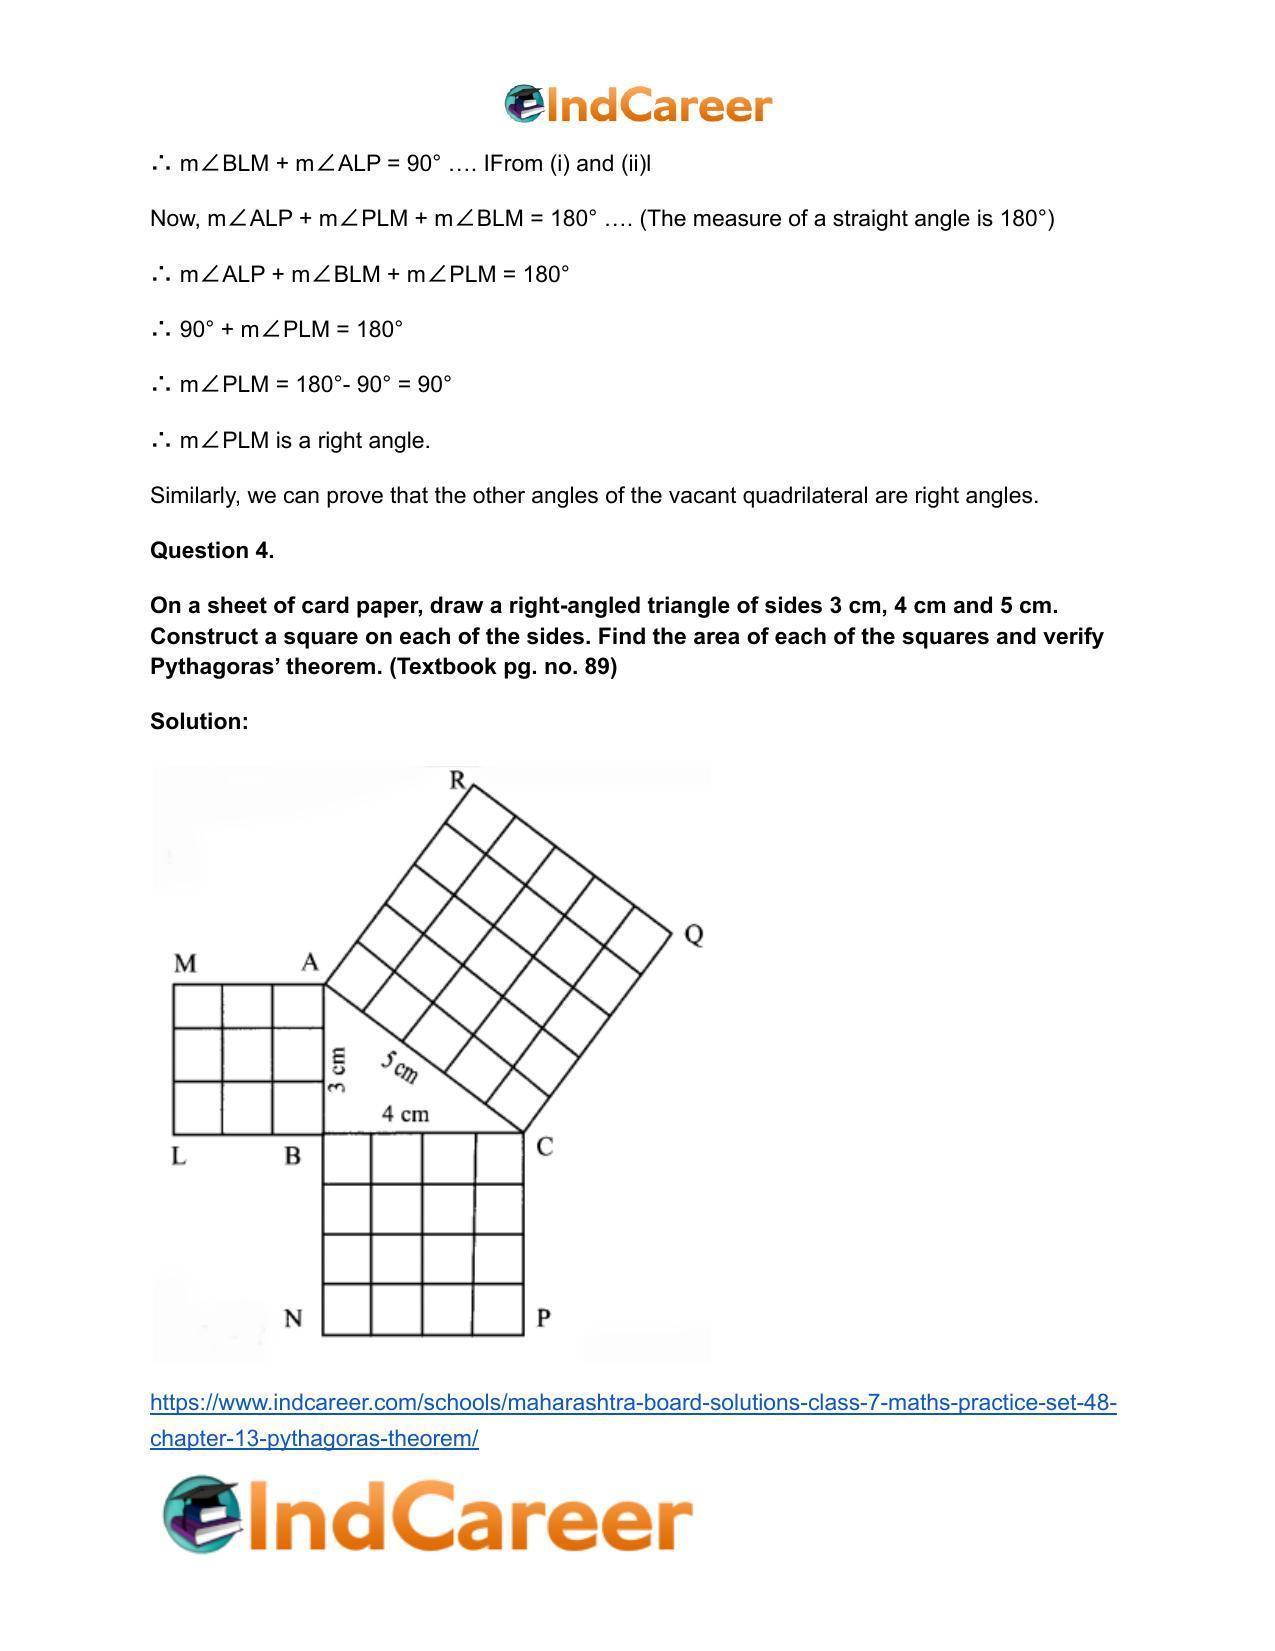 Maharashtra Board Solutions Class 7-Maths (Practice Set 48): Chapter 13- Pythagoras Theorem - Page 10